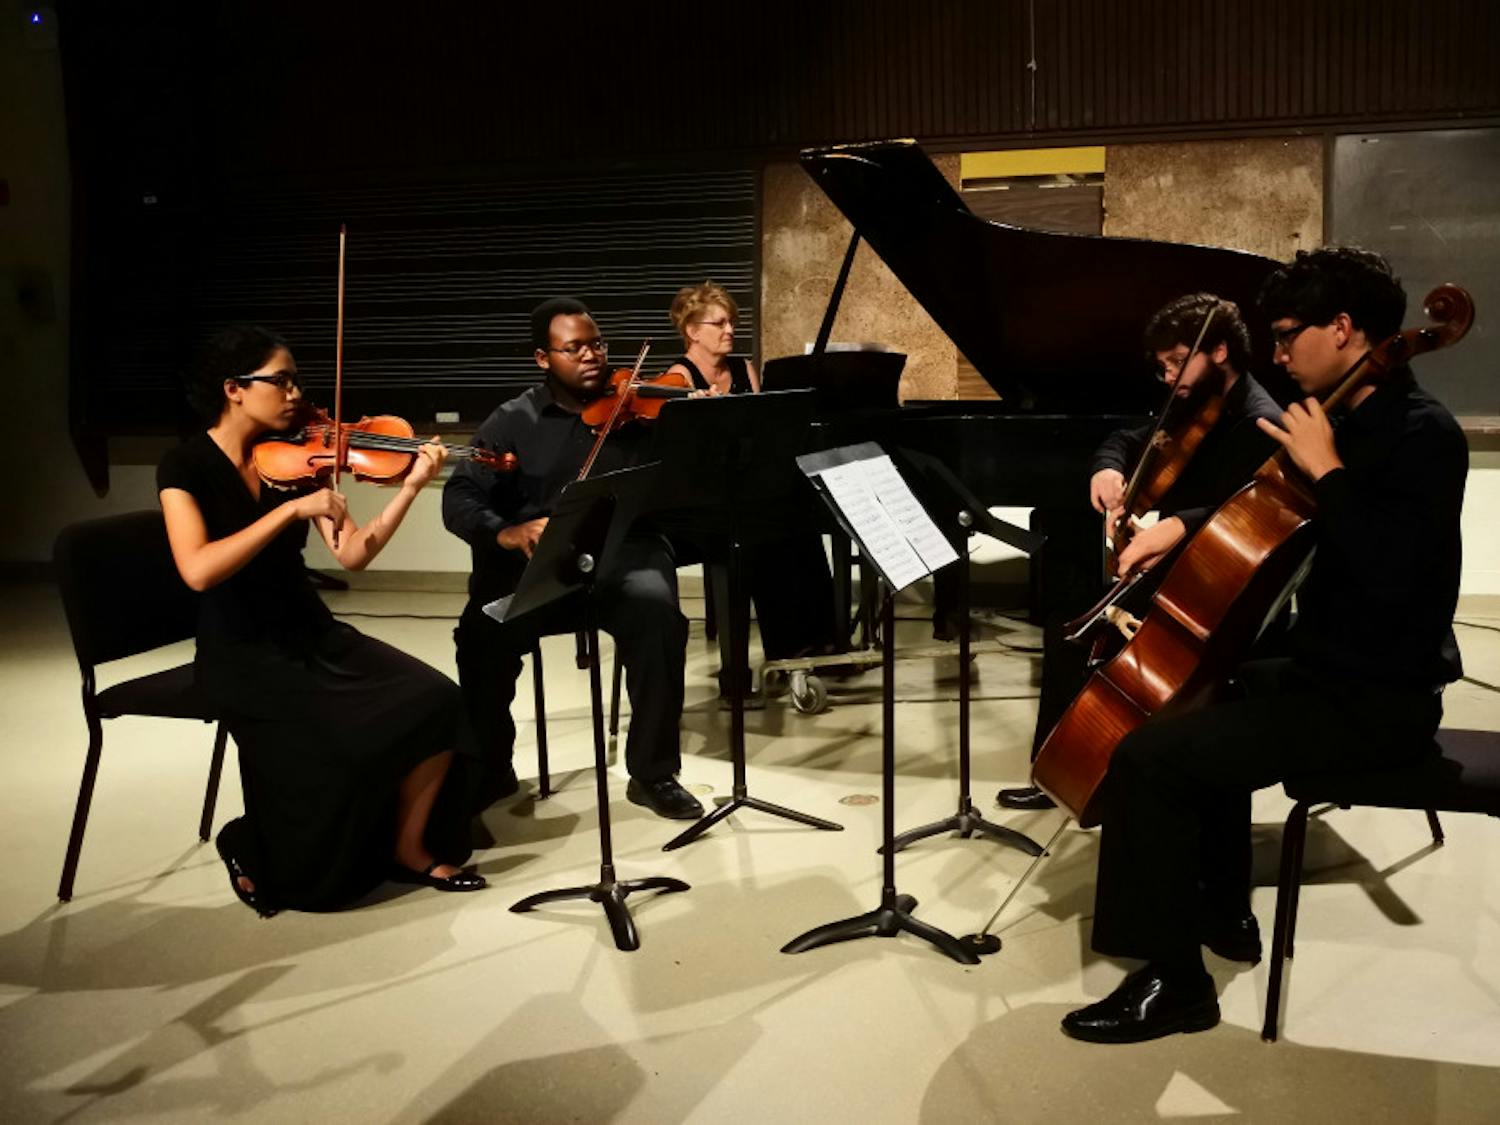 The Gator Summer Orchestra performs at the UF School of Music on July 27. The orchestra will be holding a free concert at the University Auditorium on Thursday at 7:30 p.m.